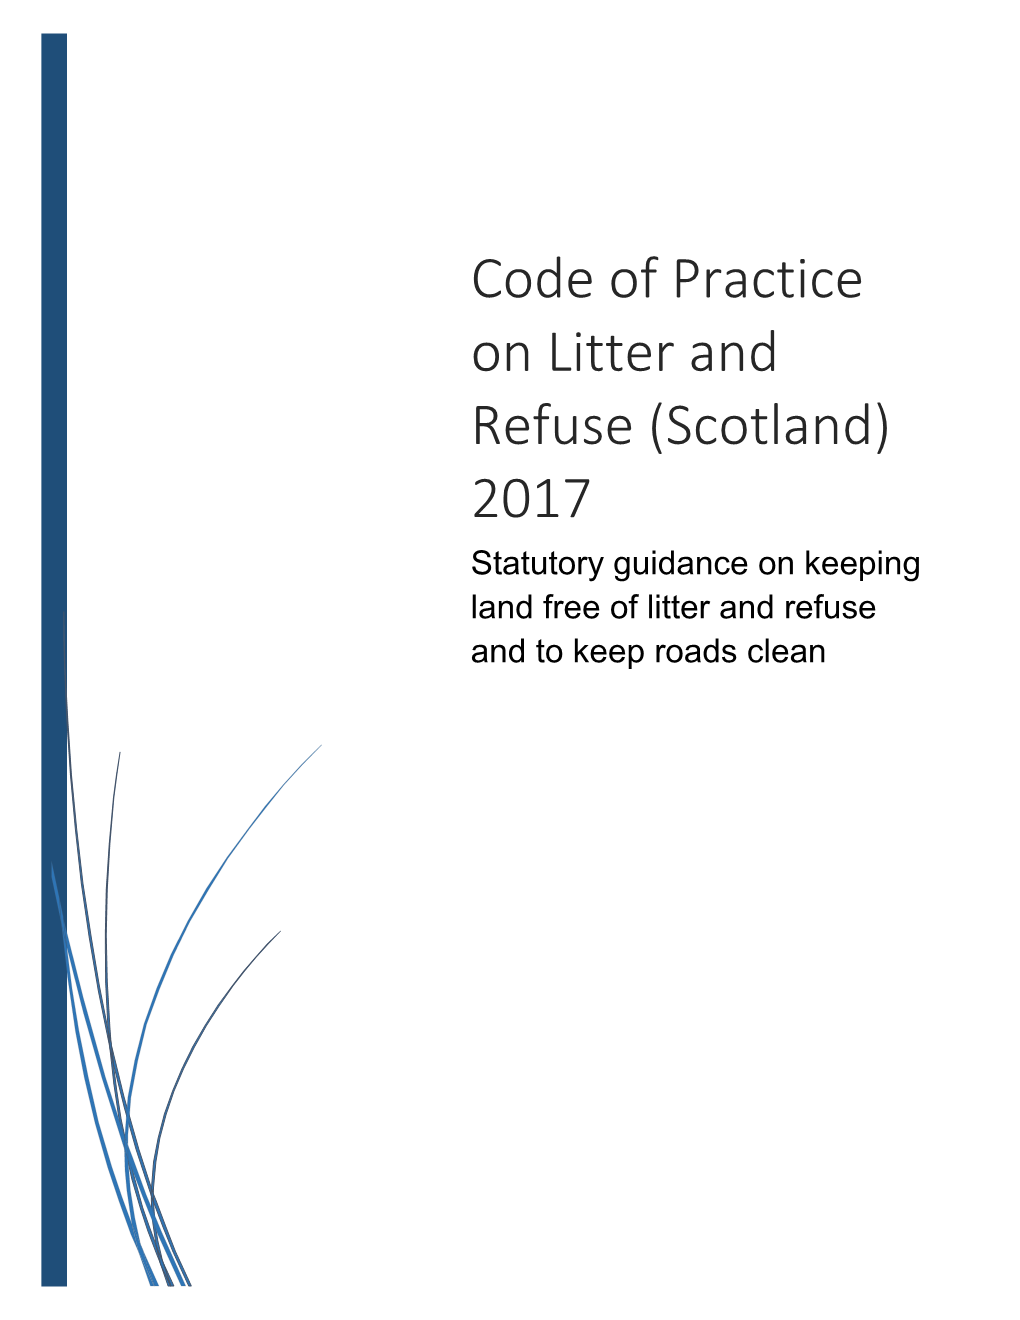 Code of Practice on Litter and Refuse (Scotland) 2017 Statutory Guidance on Keeping Land Free of Litter and Refuse and to Keep Roads Clean